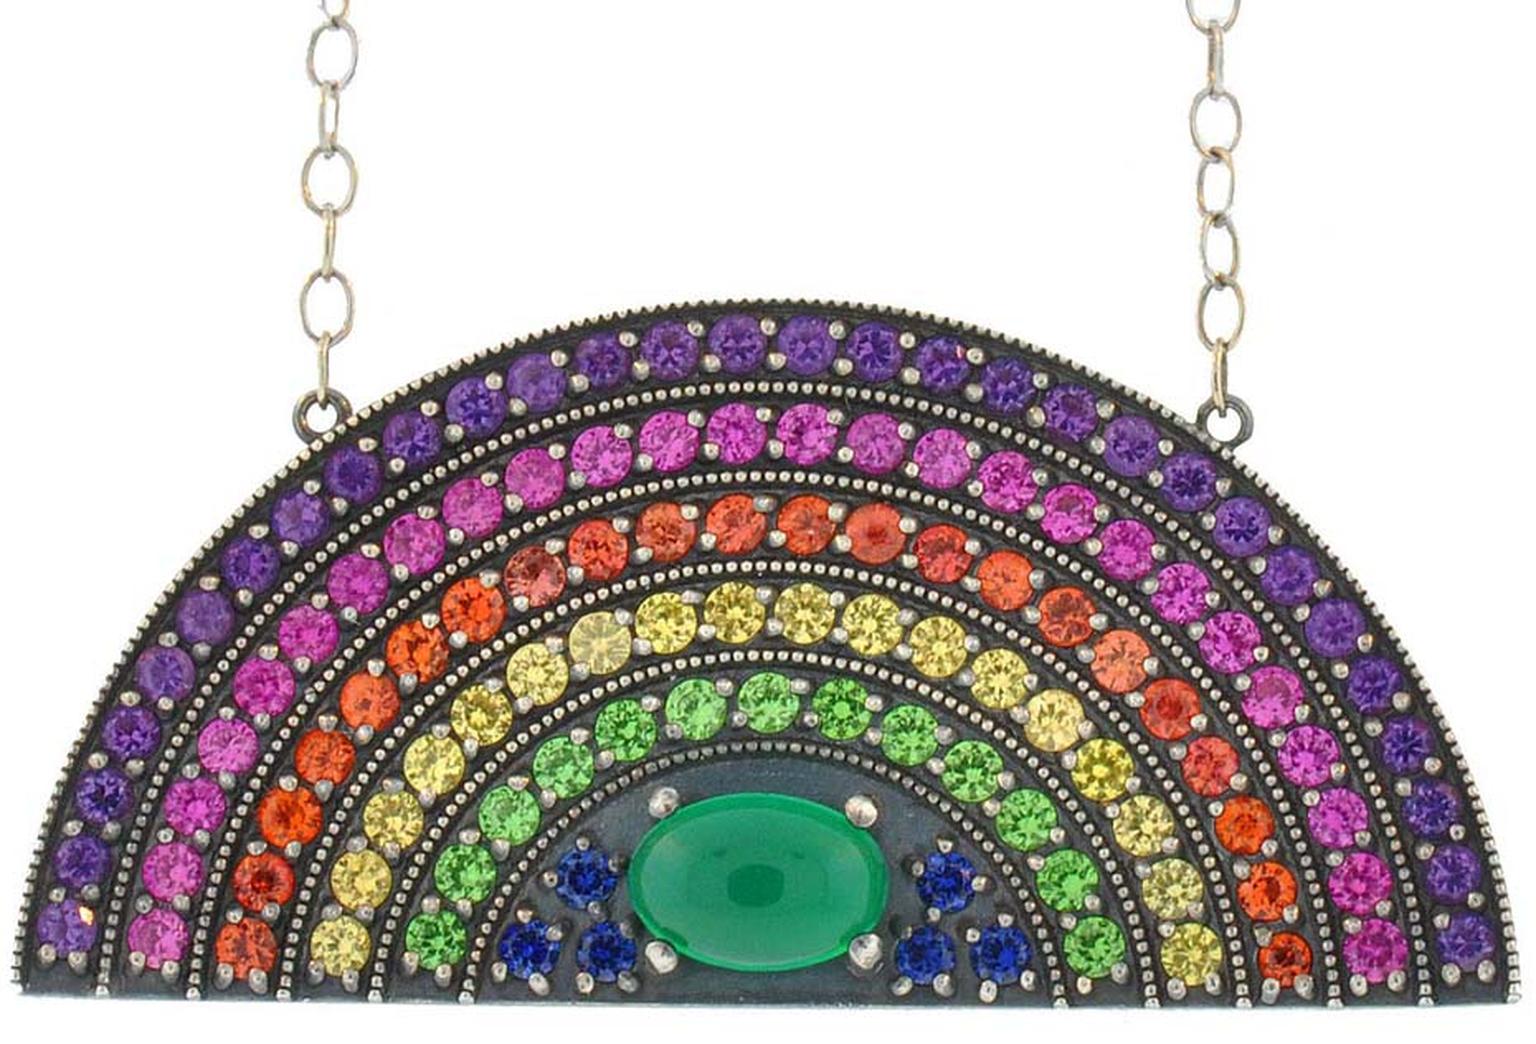 Andrea Fohrman rainbow pendant set with pink, orange, yellow and blue sapphires, amethysts, tsavorites and a green onyx centre.